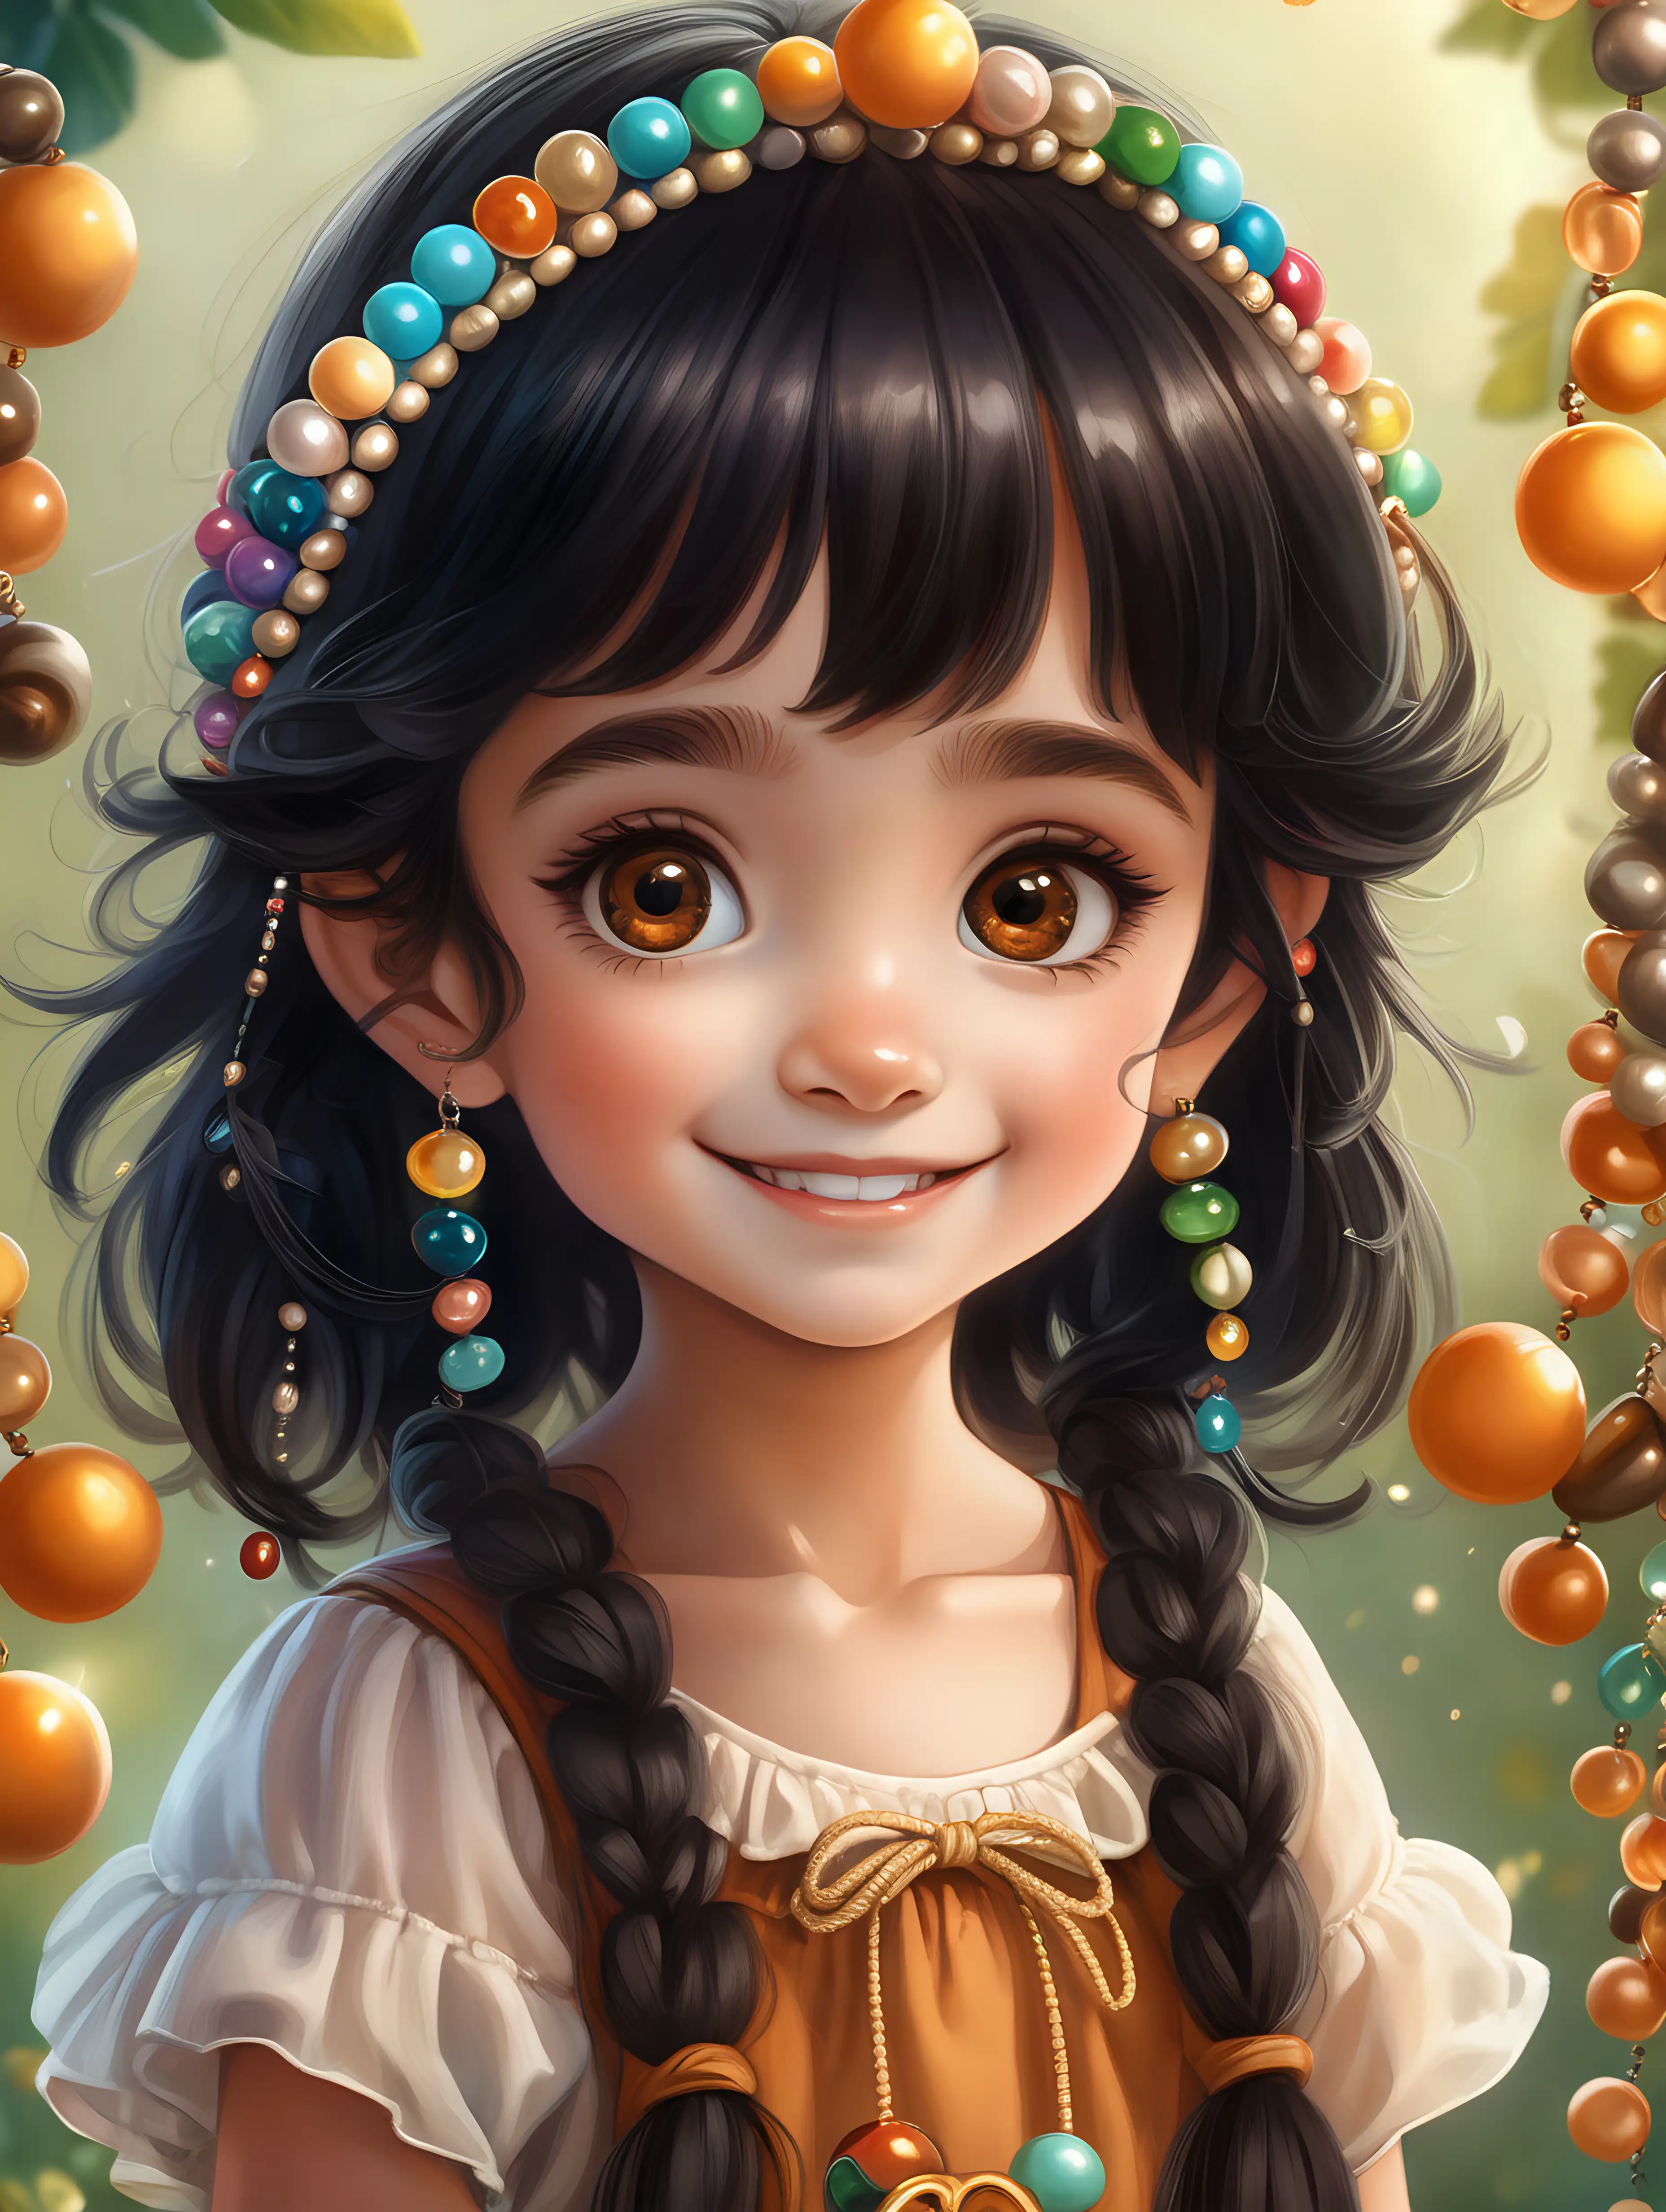 Cheerful Little Girl with Beaded Accessories in a FairyTale Setting